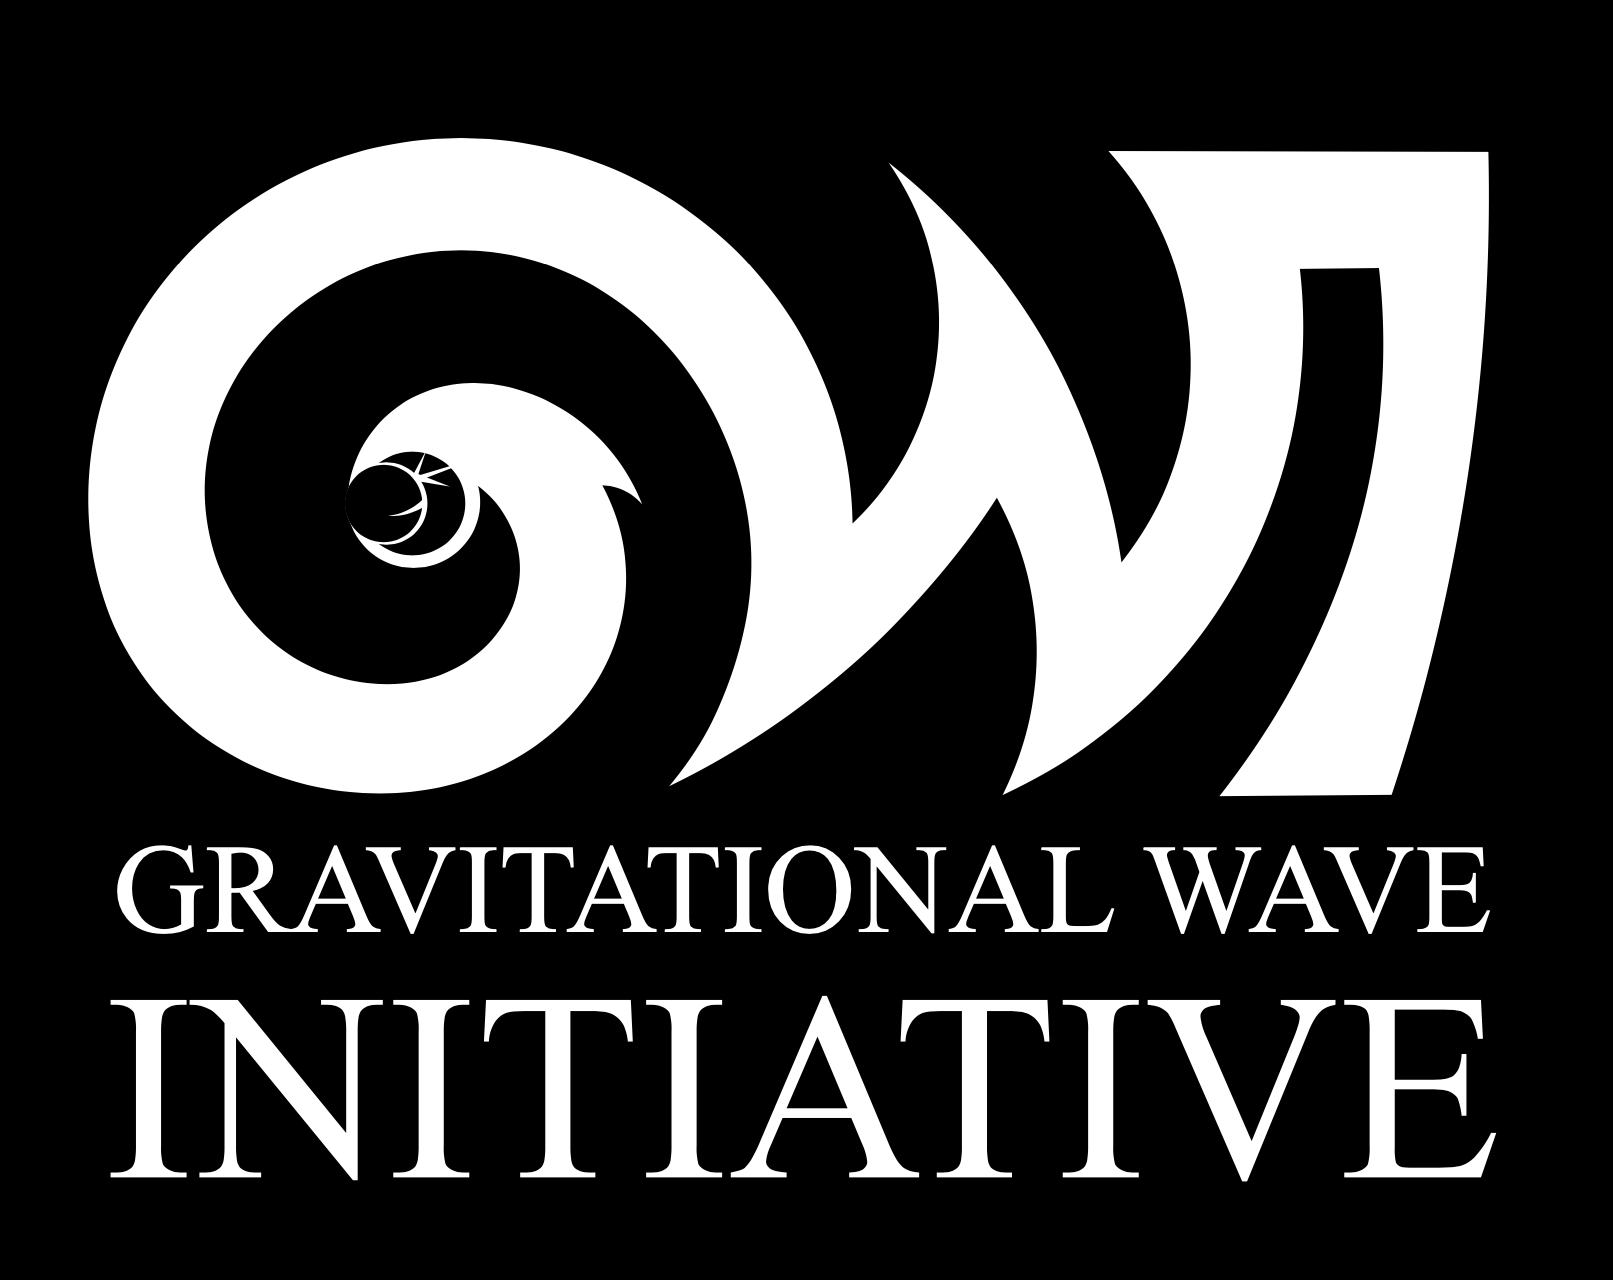  Launch of new Gravitational Wave Initiative